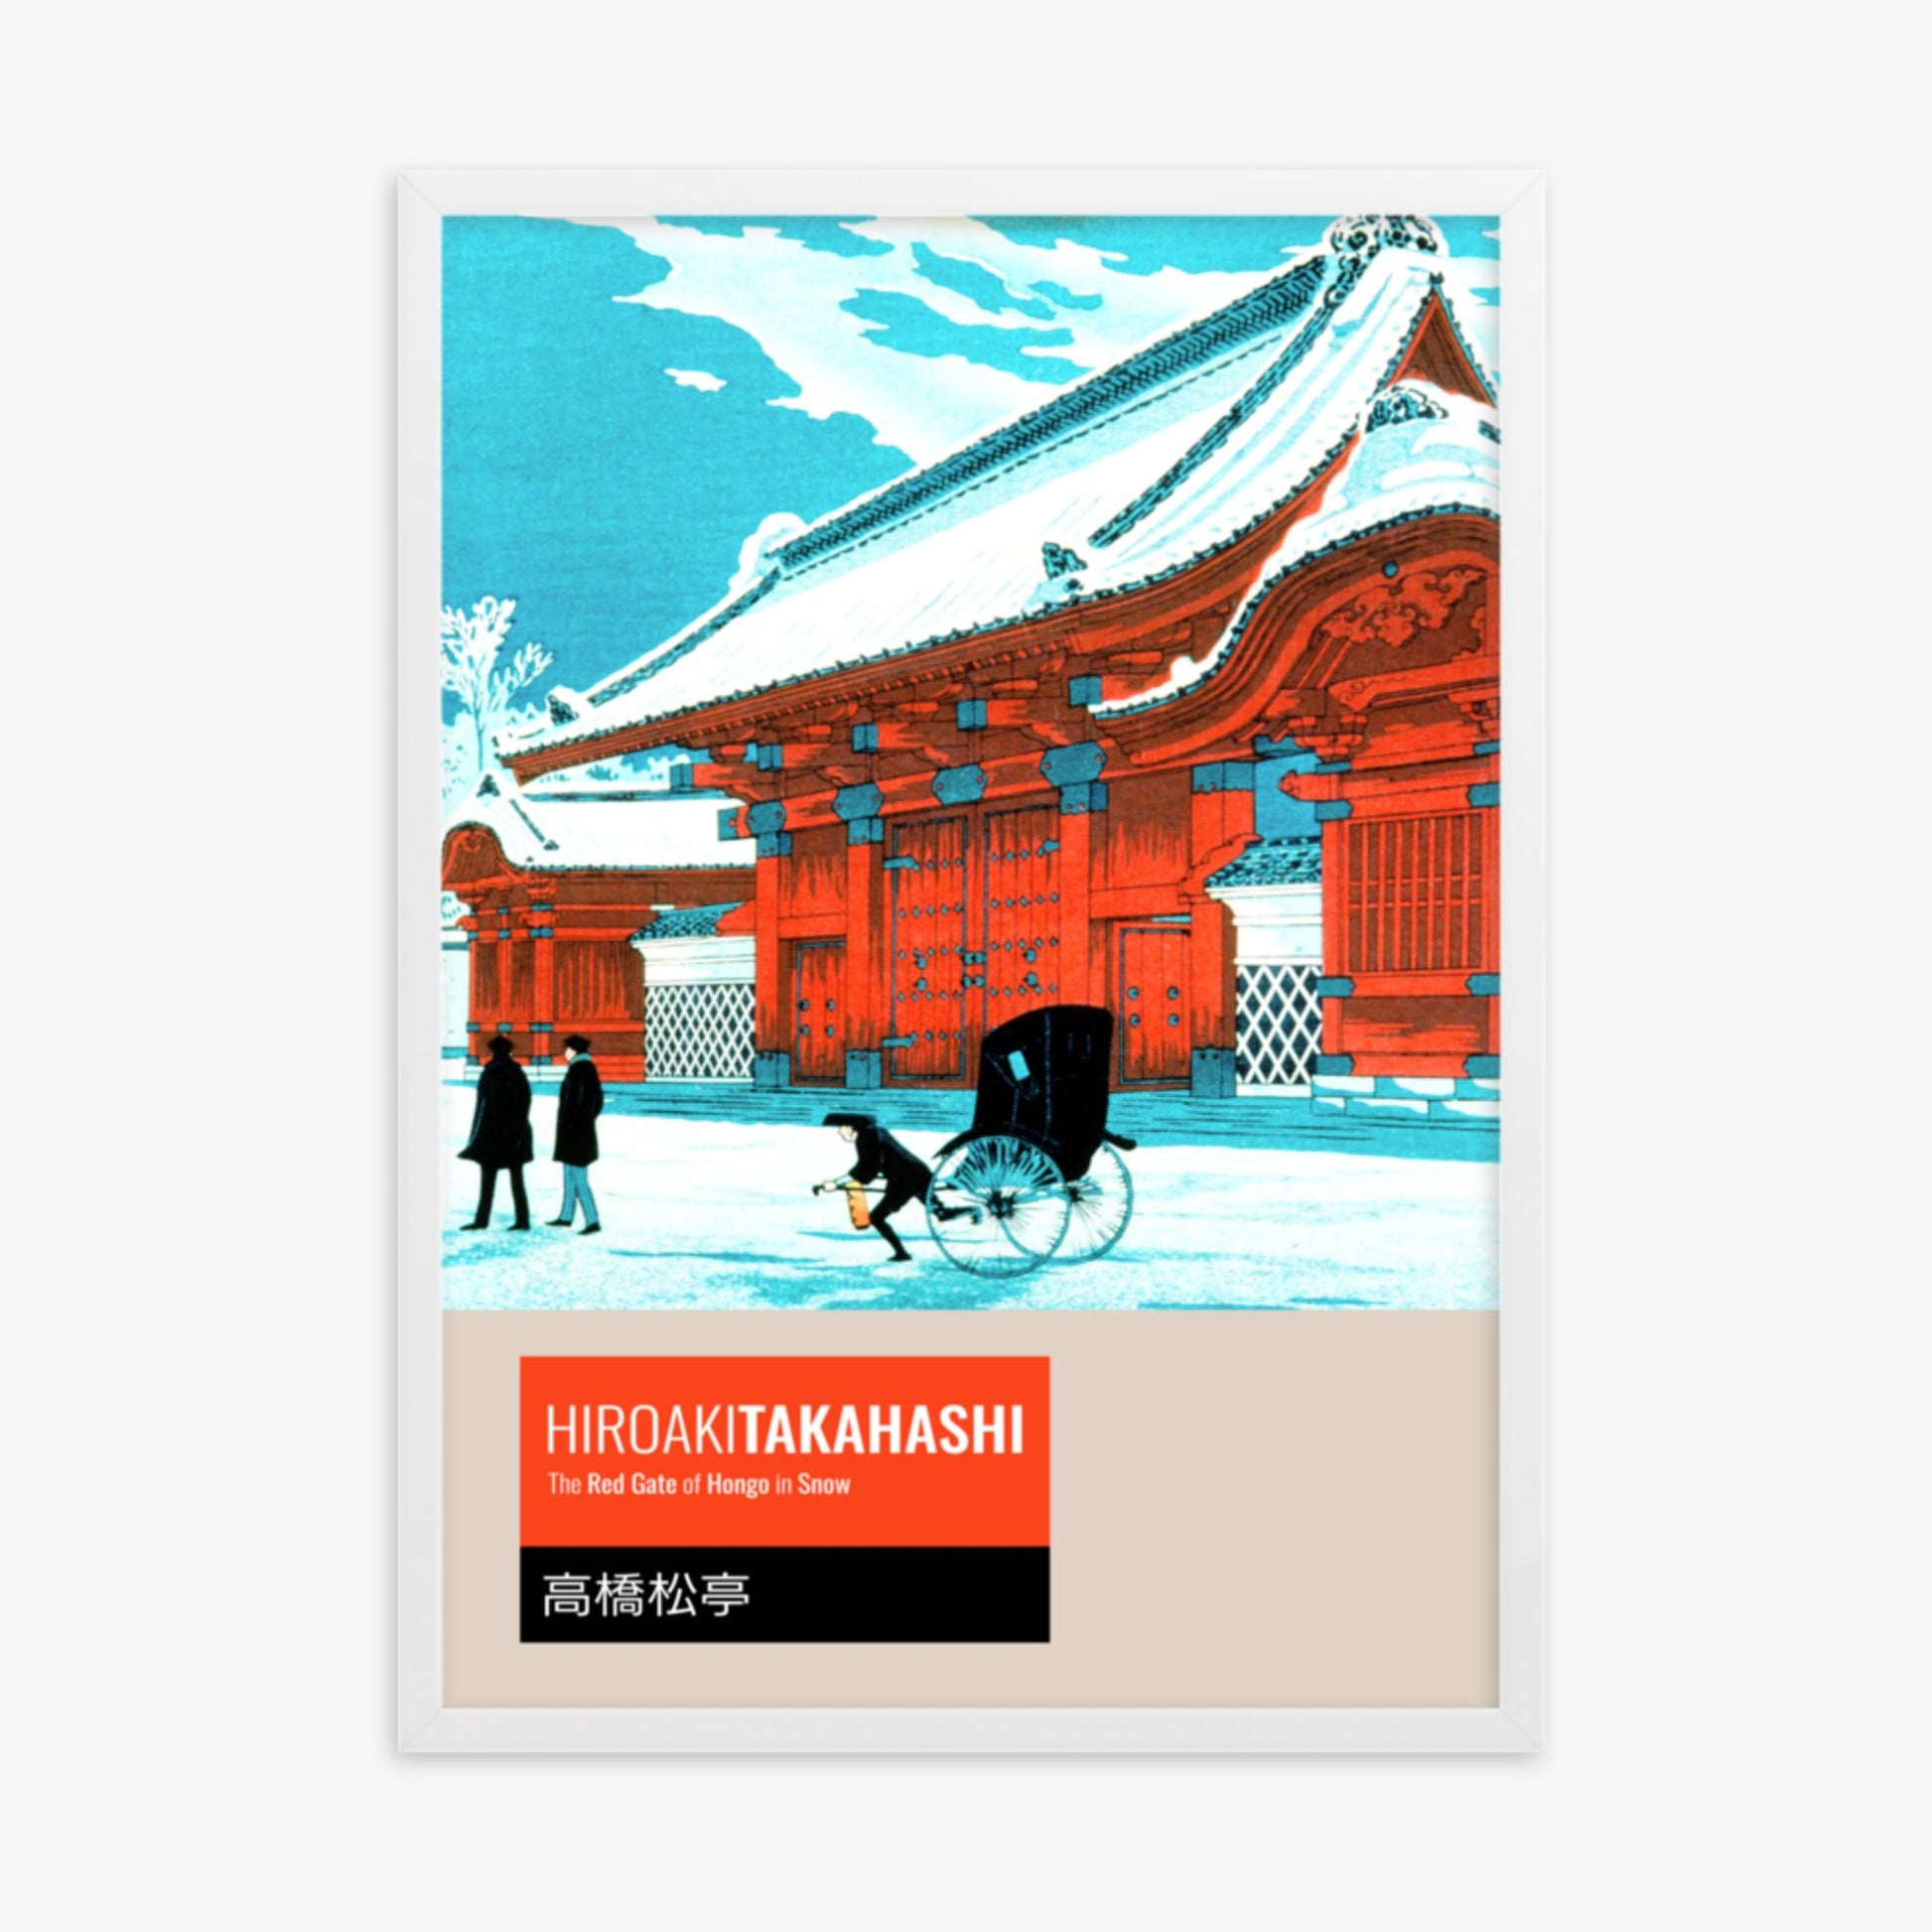 Takahashi Hiroaki (Shōtei) - The Red Gate of Hongo in Snow - Decoration 50x70 cm Poster With White Frame